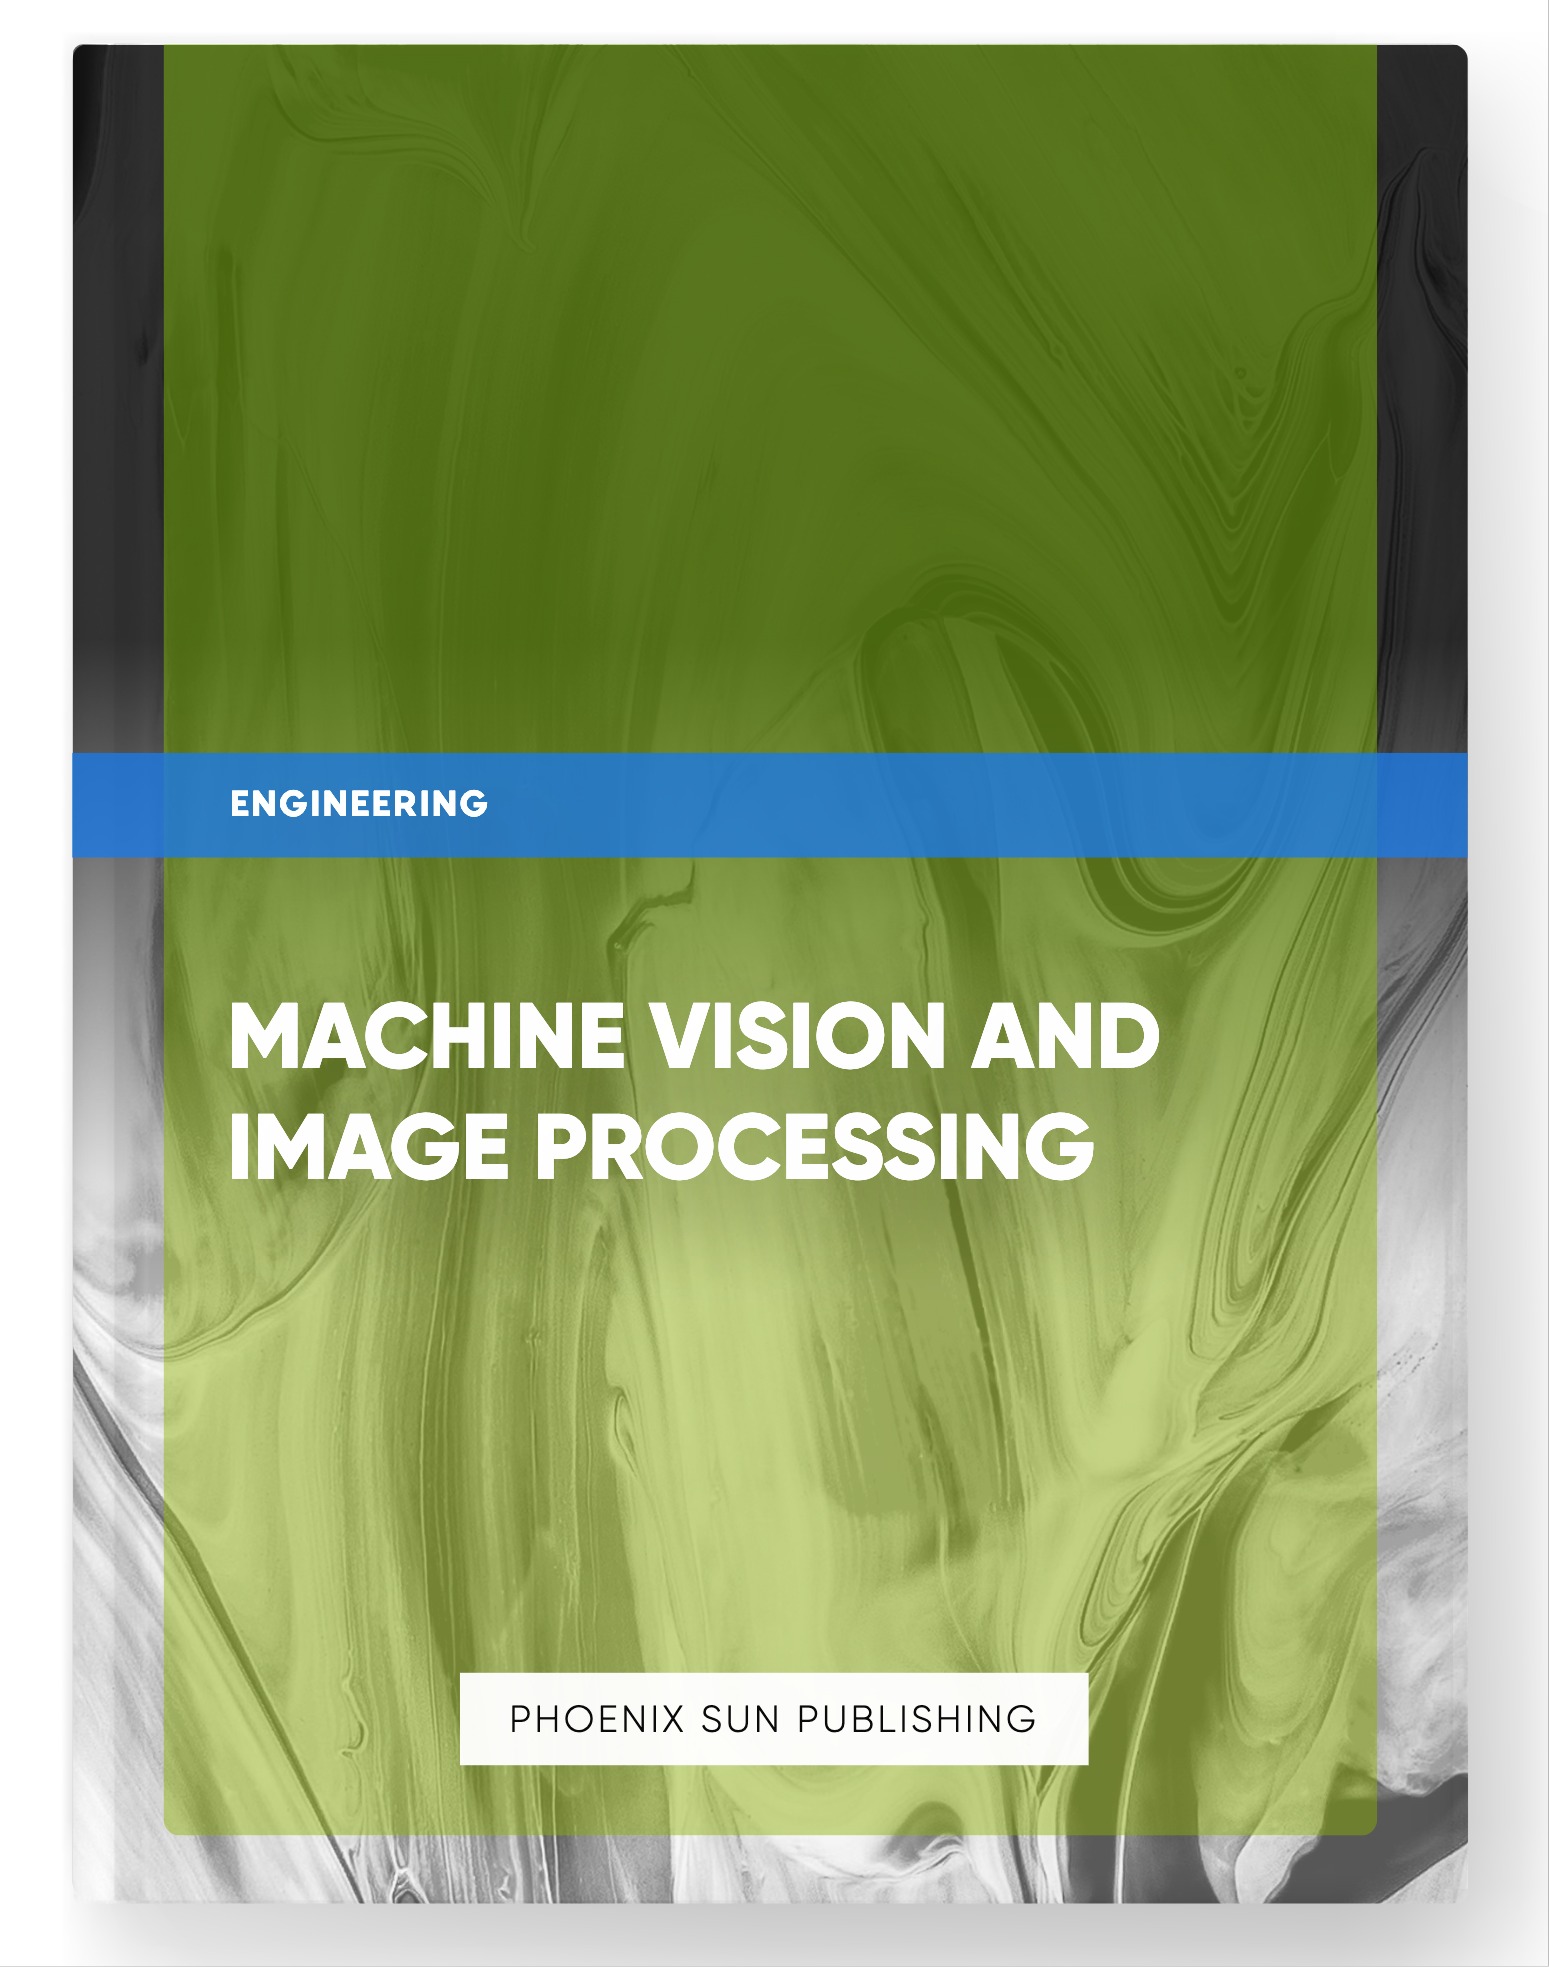 Machine Vision and Image Processing